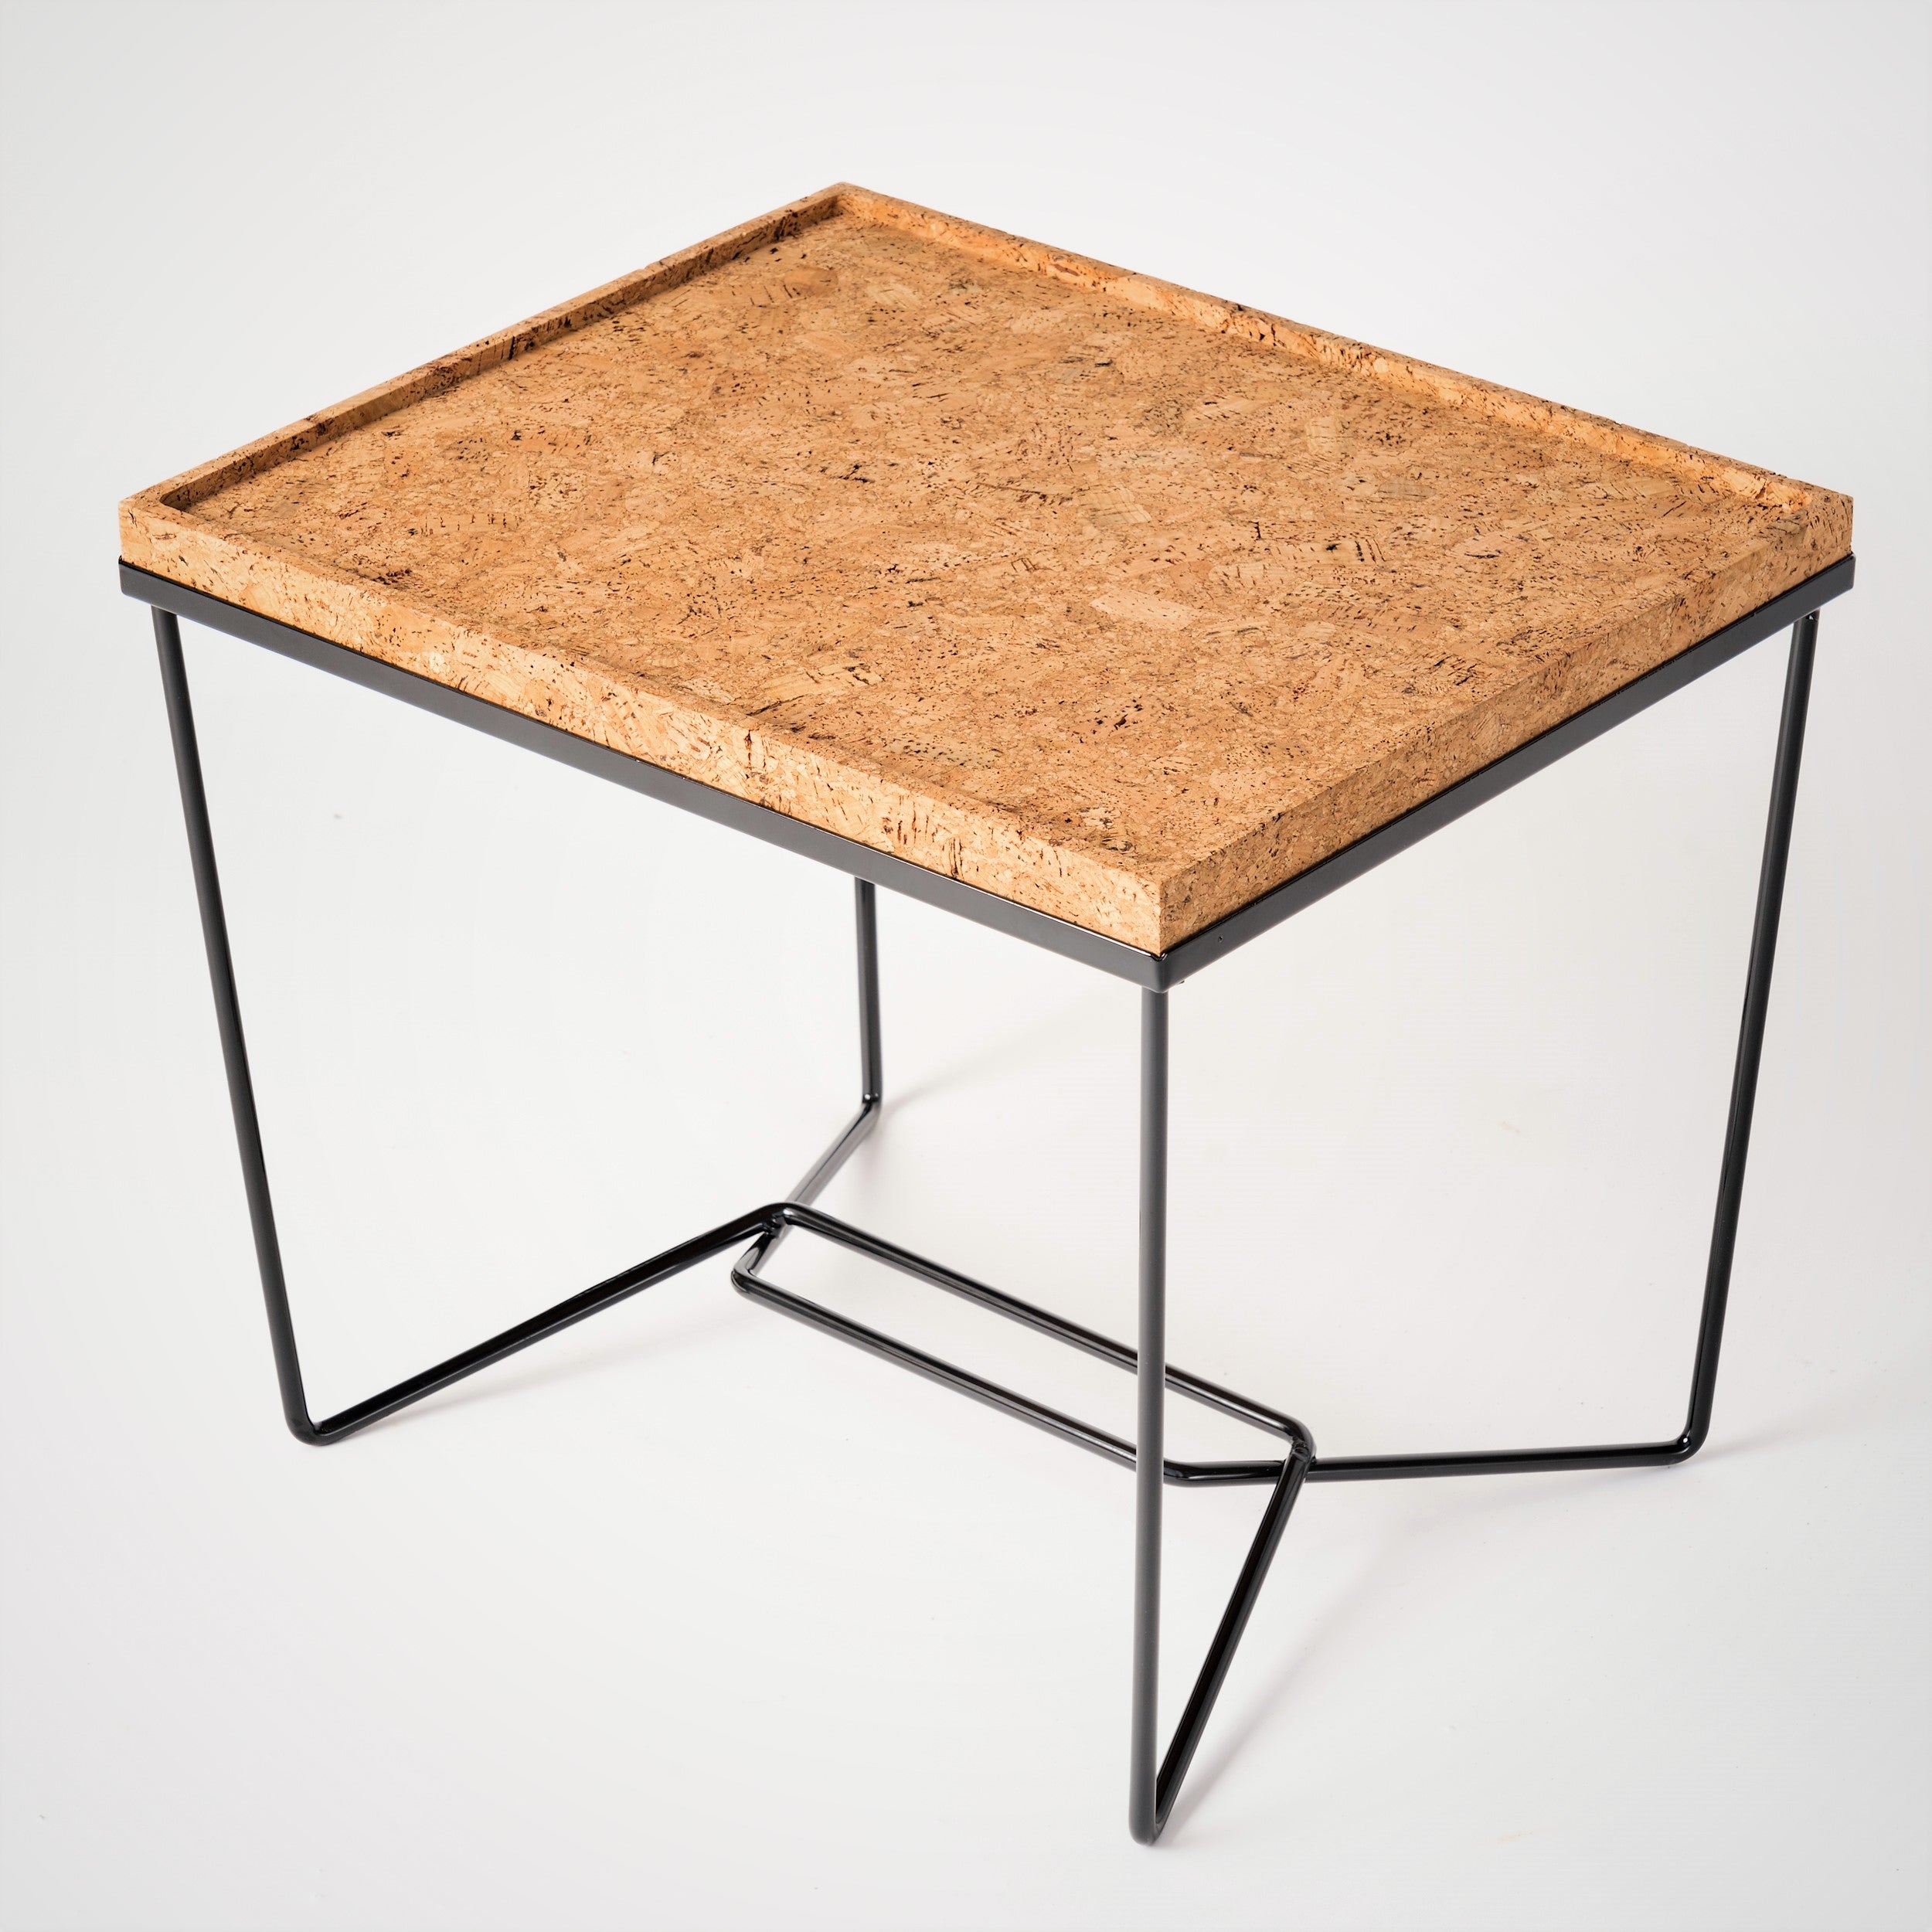 "Trombone" Black Lacquered Steel & Natural Cork Side Table by Facto Atelier Paris